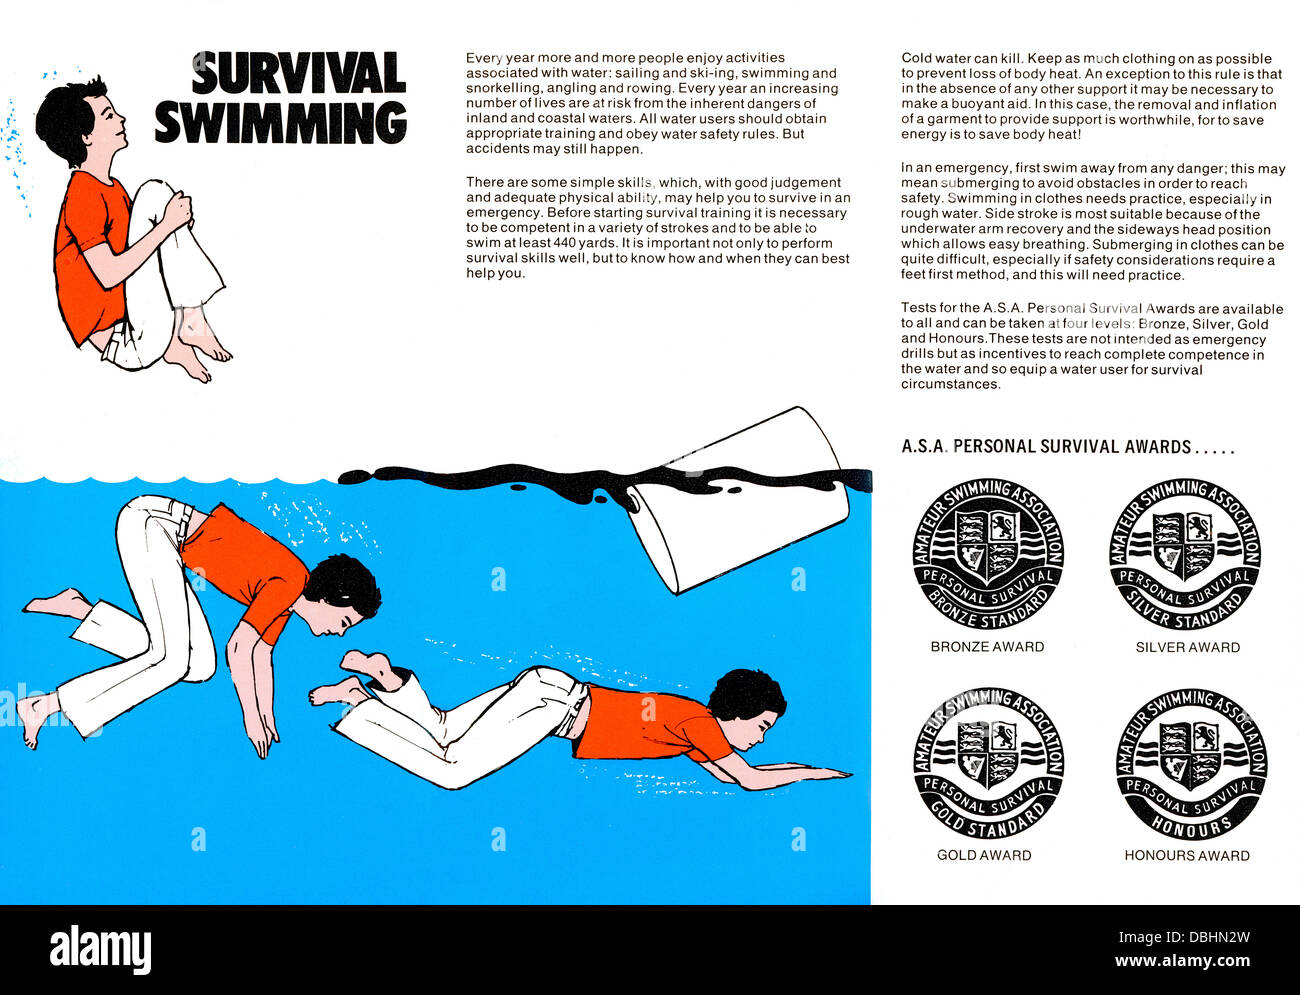 ASA Amateur Swimming Association Safety Advice, published by Bovril probably 1960s Survival Swimming Stock Photo